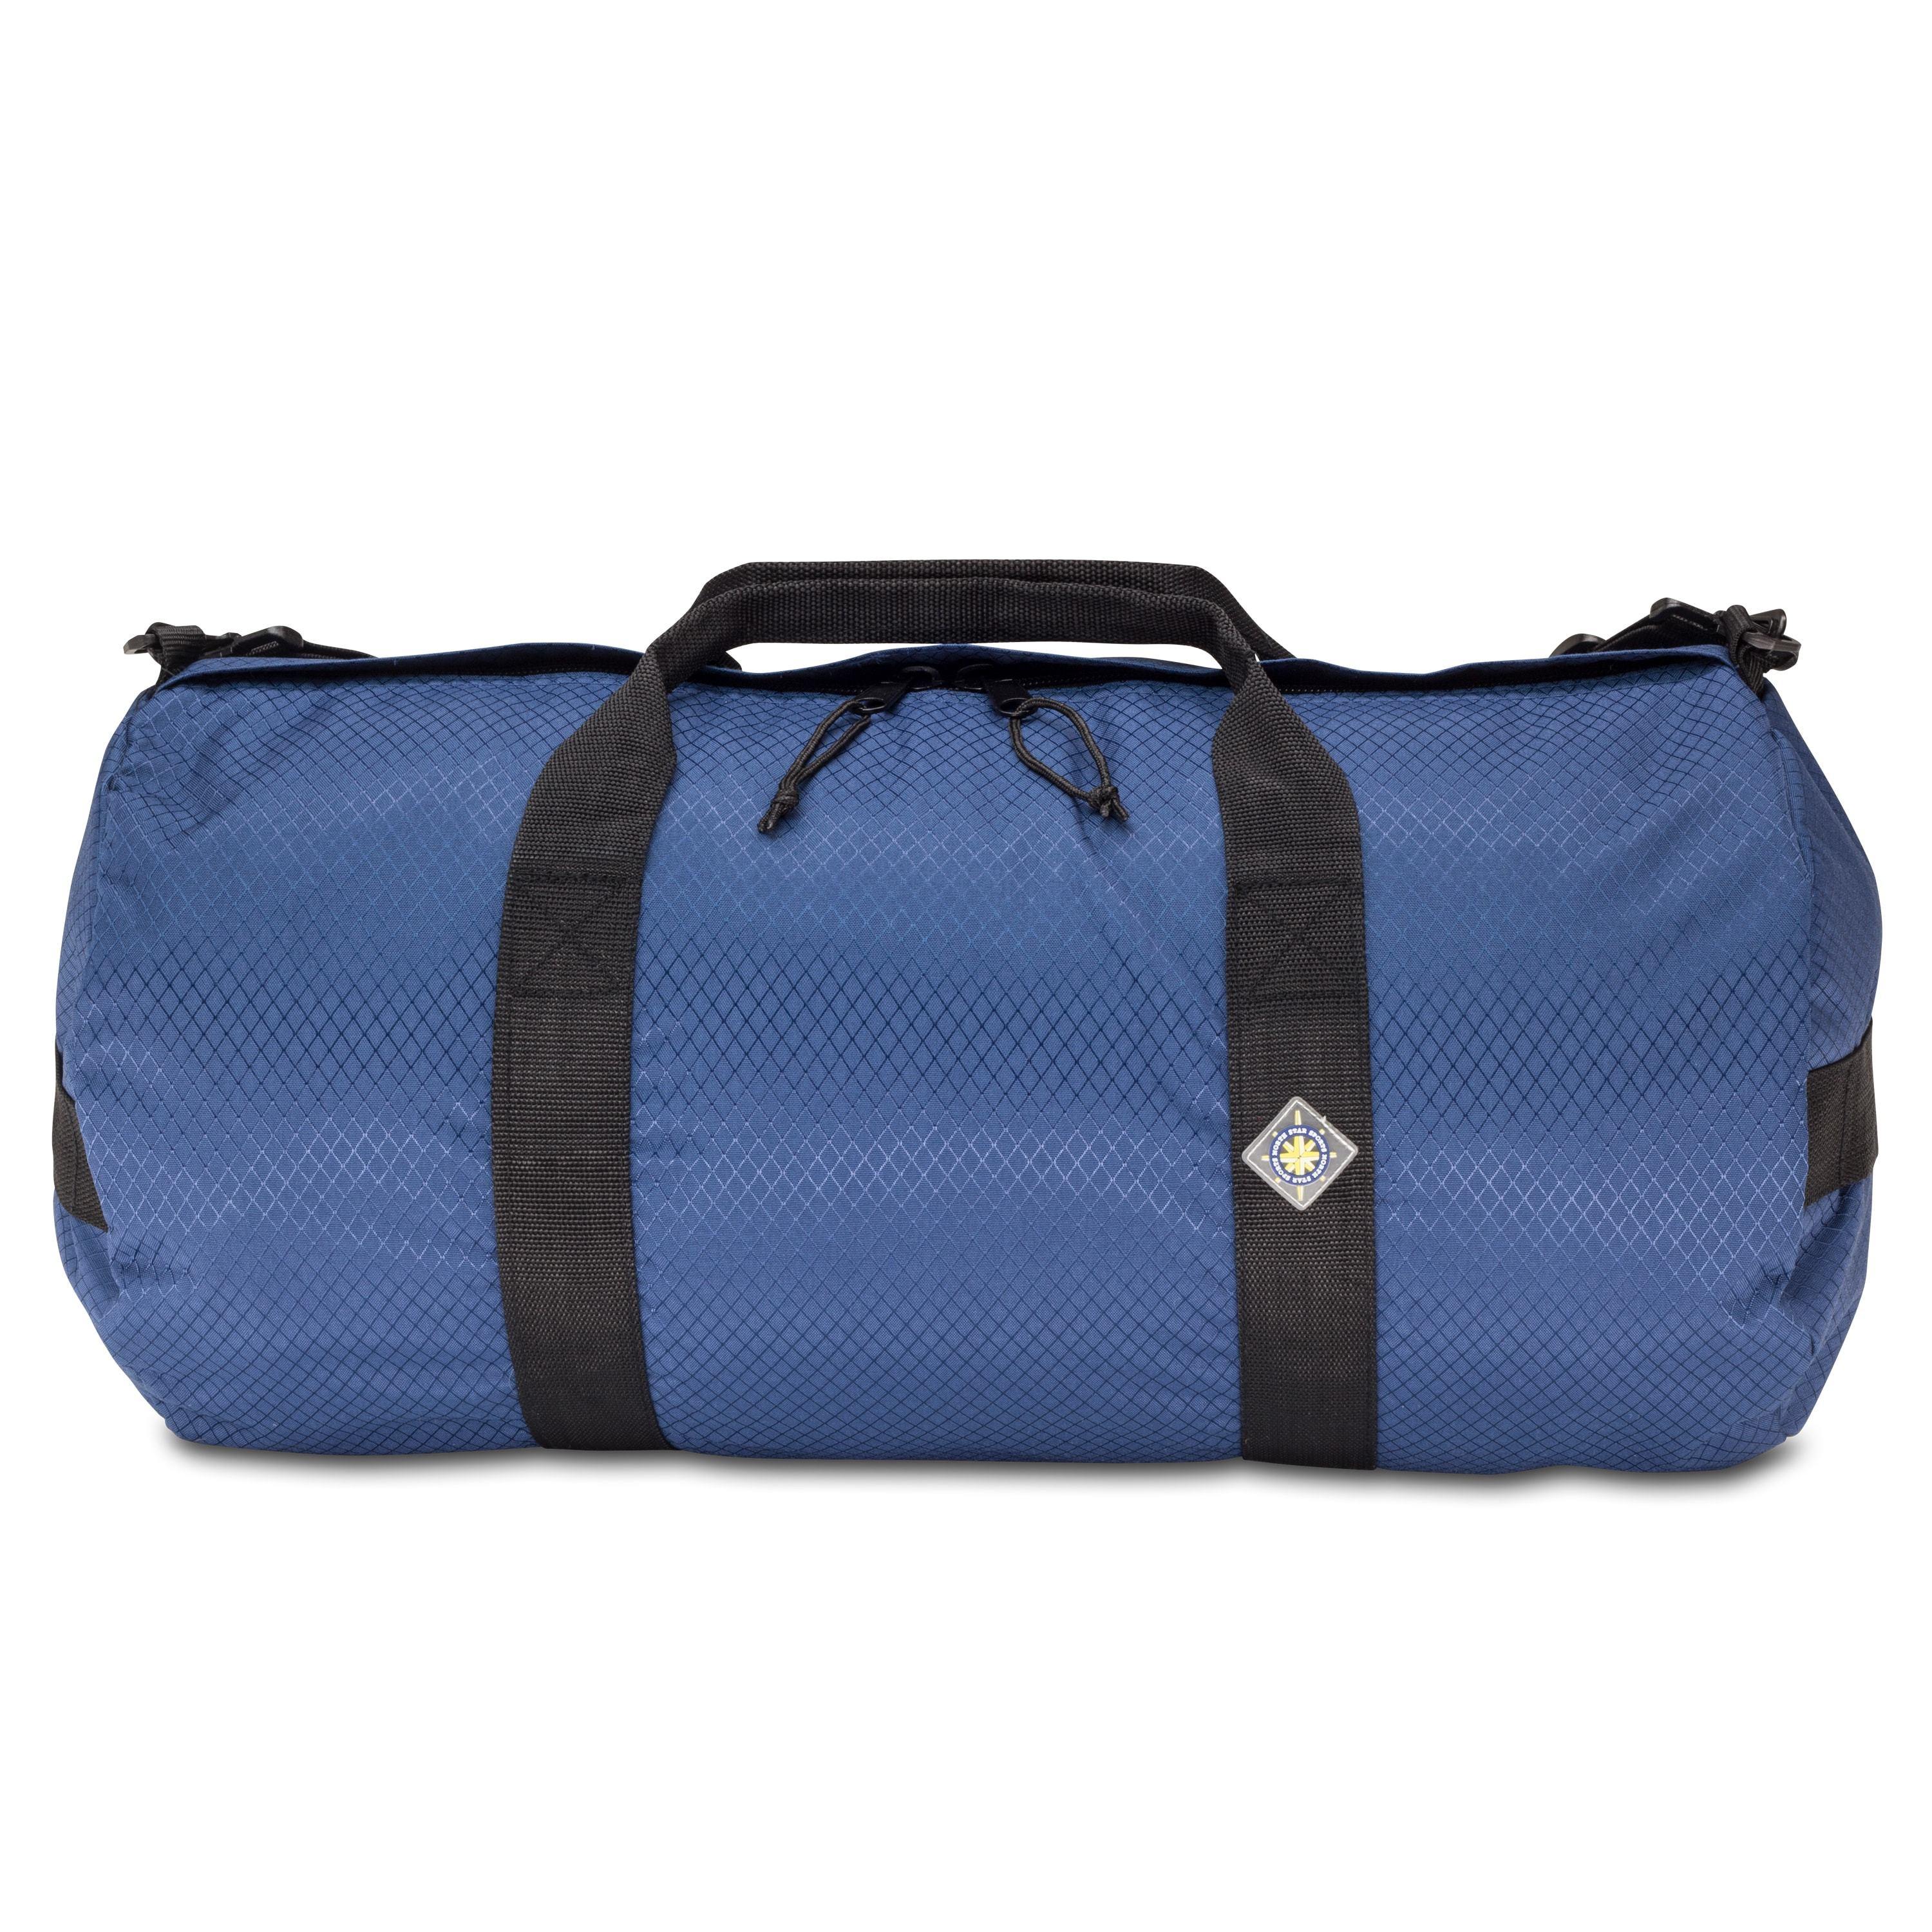 Studio photo the Pacific Blue SD1224DLX Standard Duffle by Northstar Bags. 44 liter duffel with diamond ripstop fabric, thick webbing straps, and a large format metal zipper. Guaranteed for life.